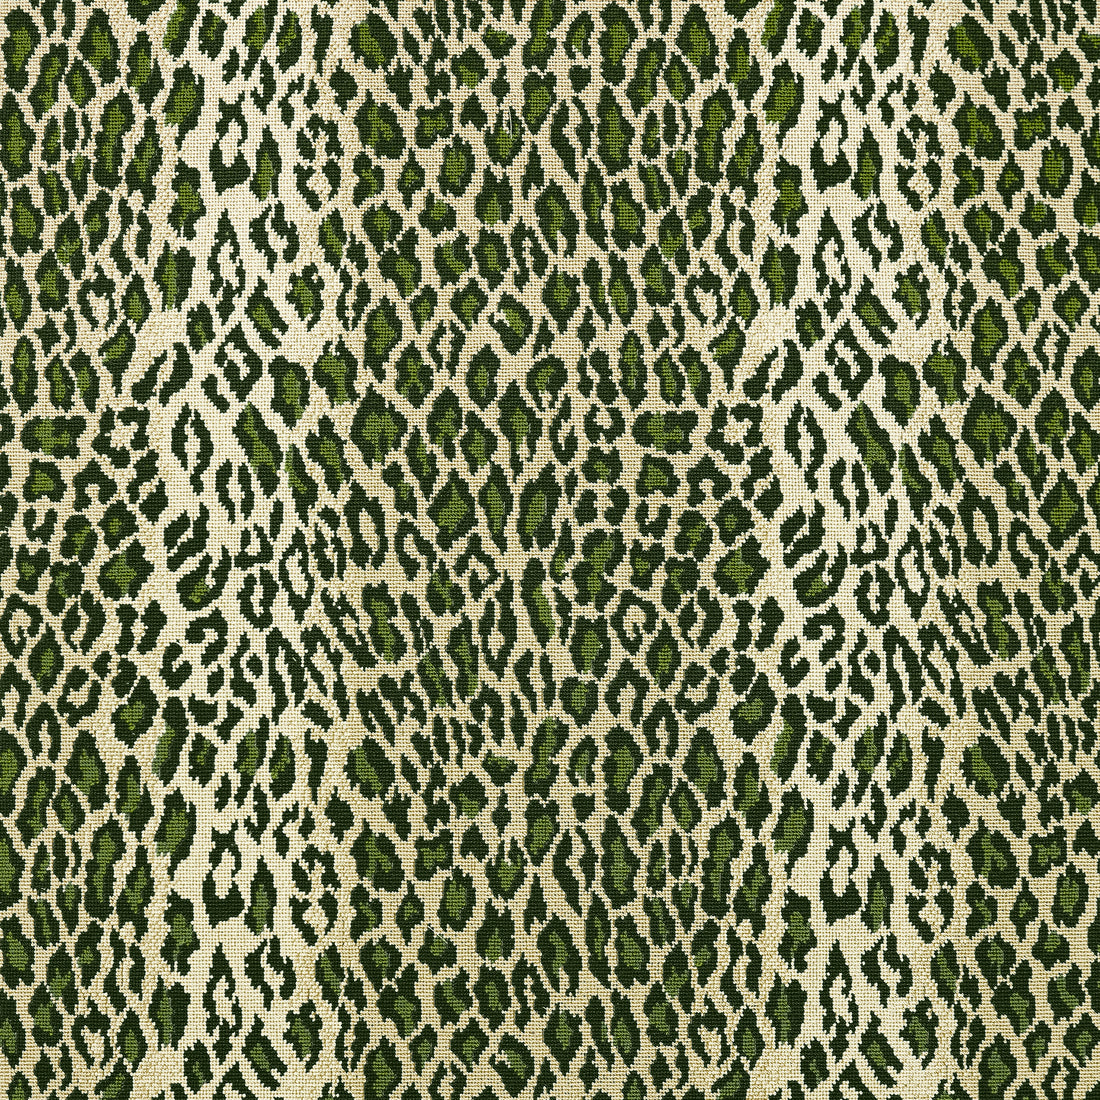 Amur fabric in emerald green color - pattern number W80433 - by Thibaut in the Woven Resource Vol 10 Menagerie collection